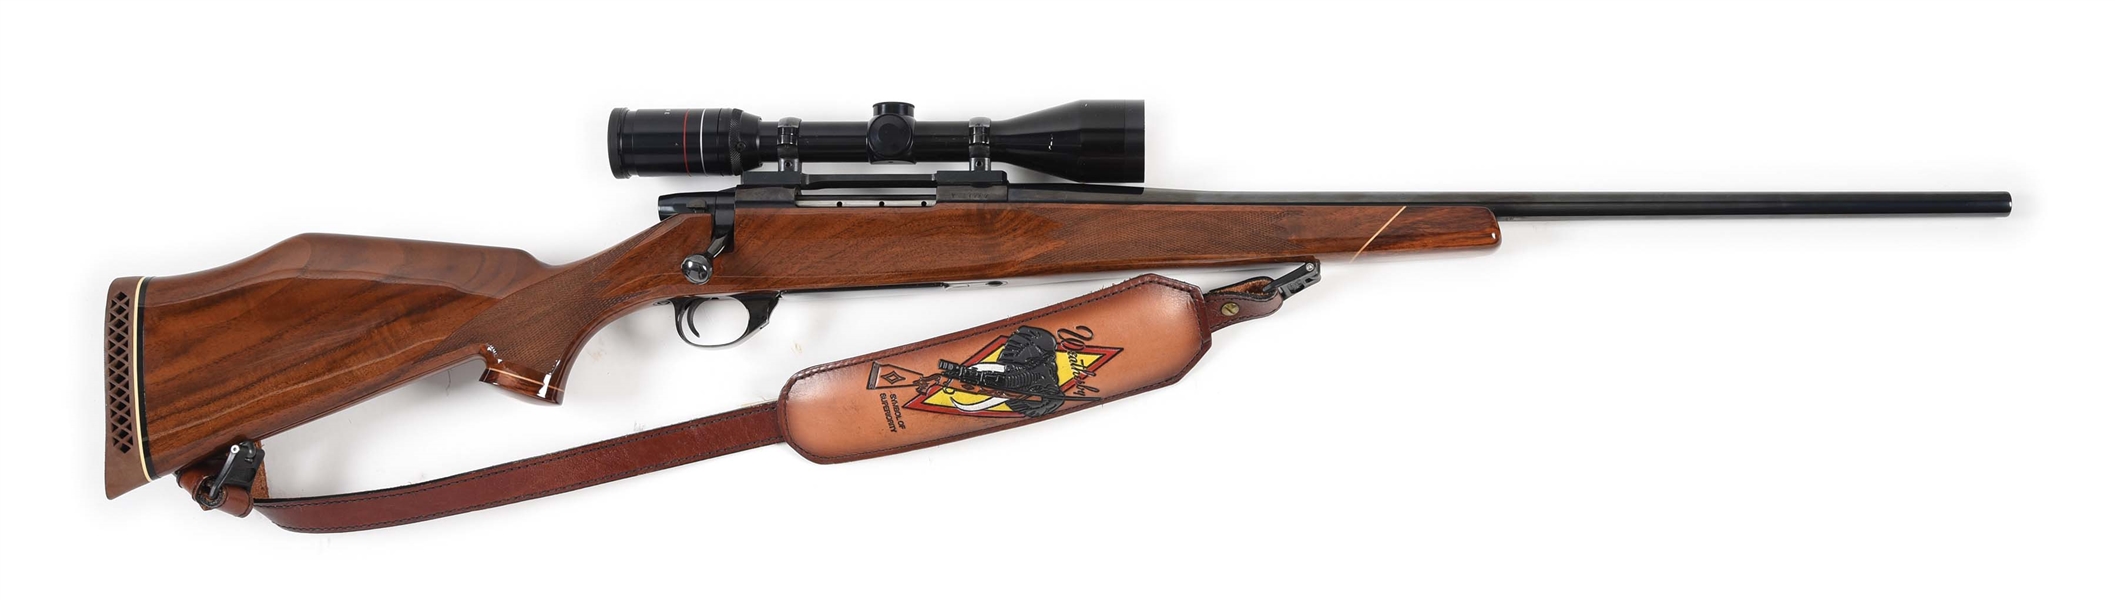 (C) WEATHERBY VANGUARD BOLT ACTION 7MM REM MAG RIFLE WITH SCOPE.